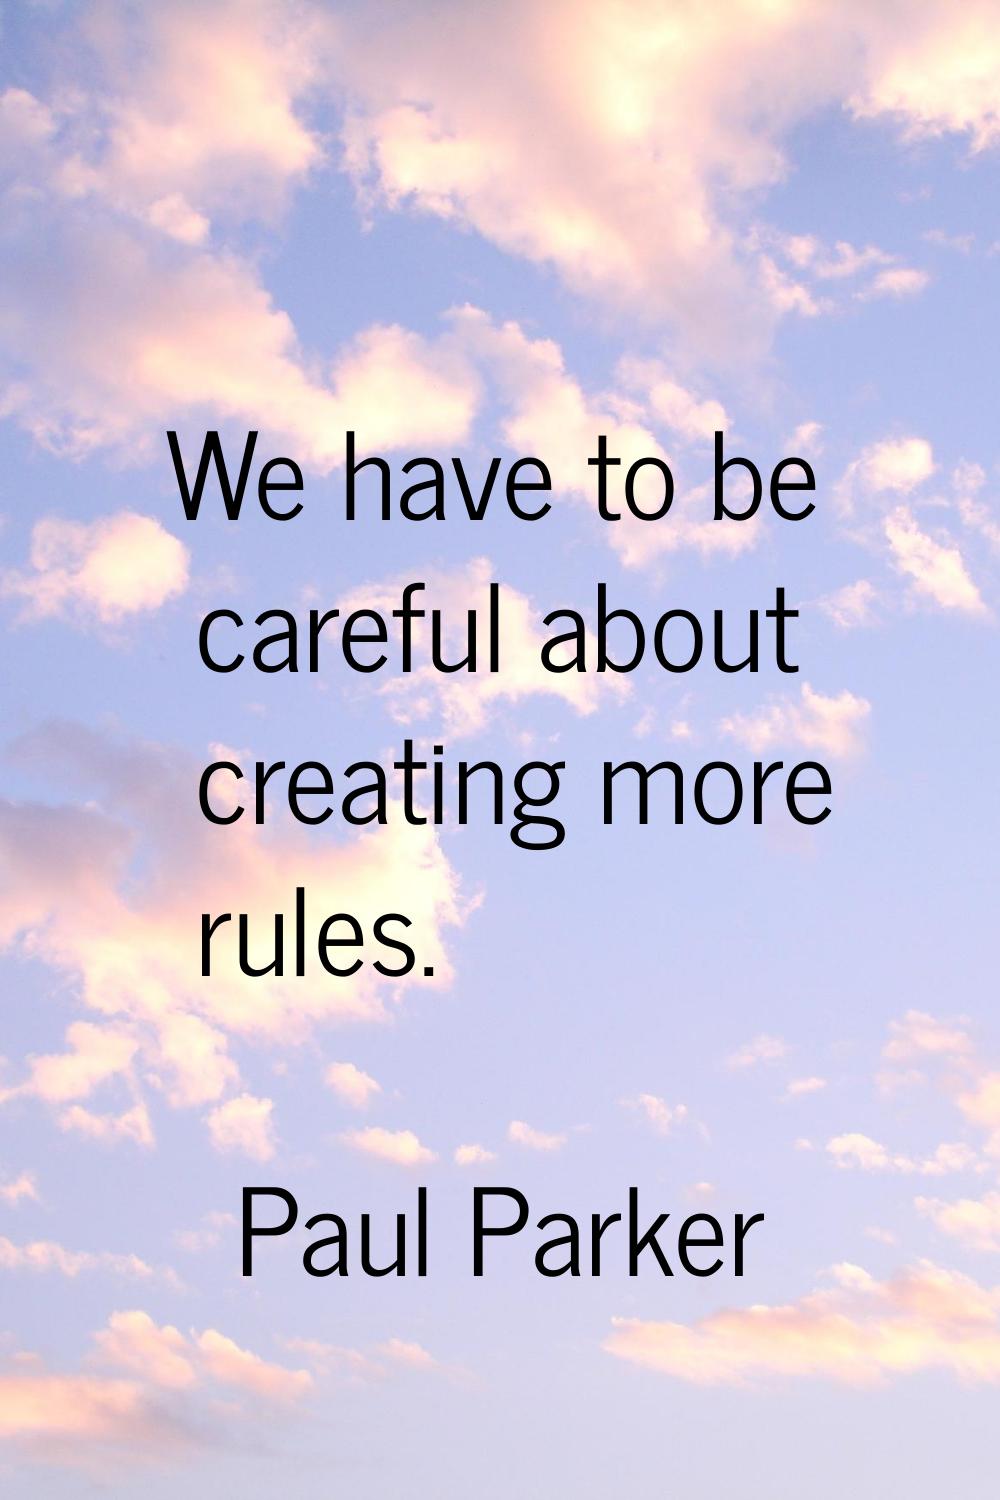 We have to be careful about creating more rules.